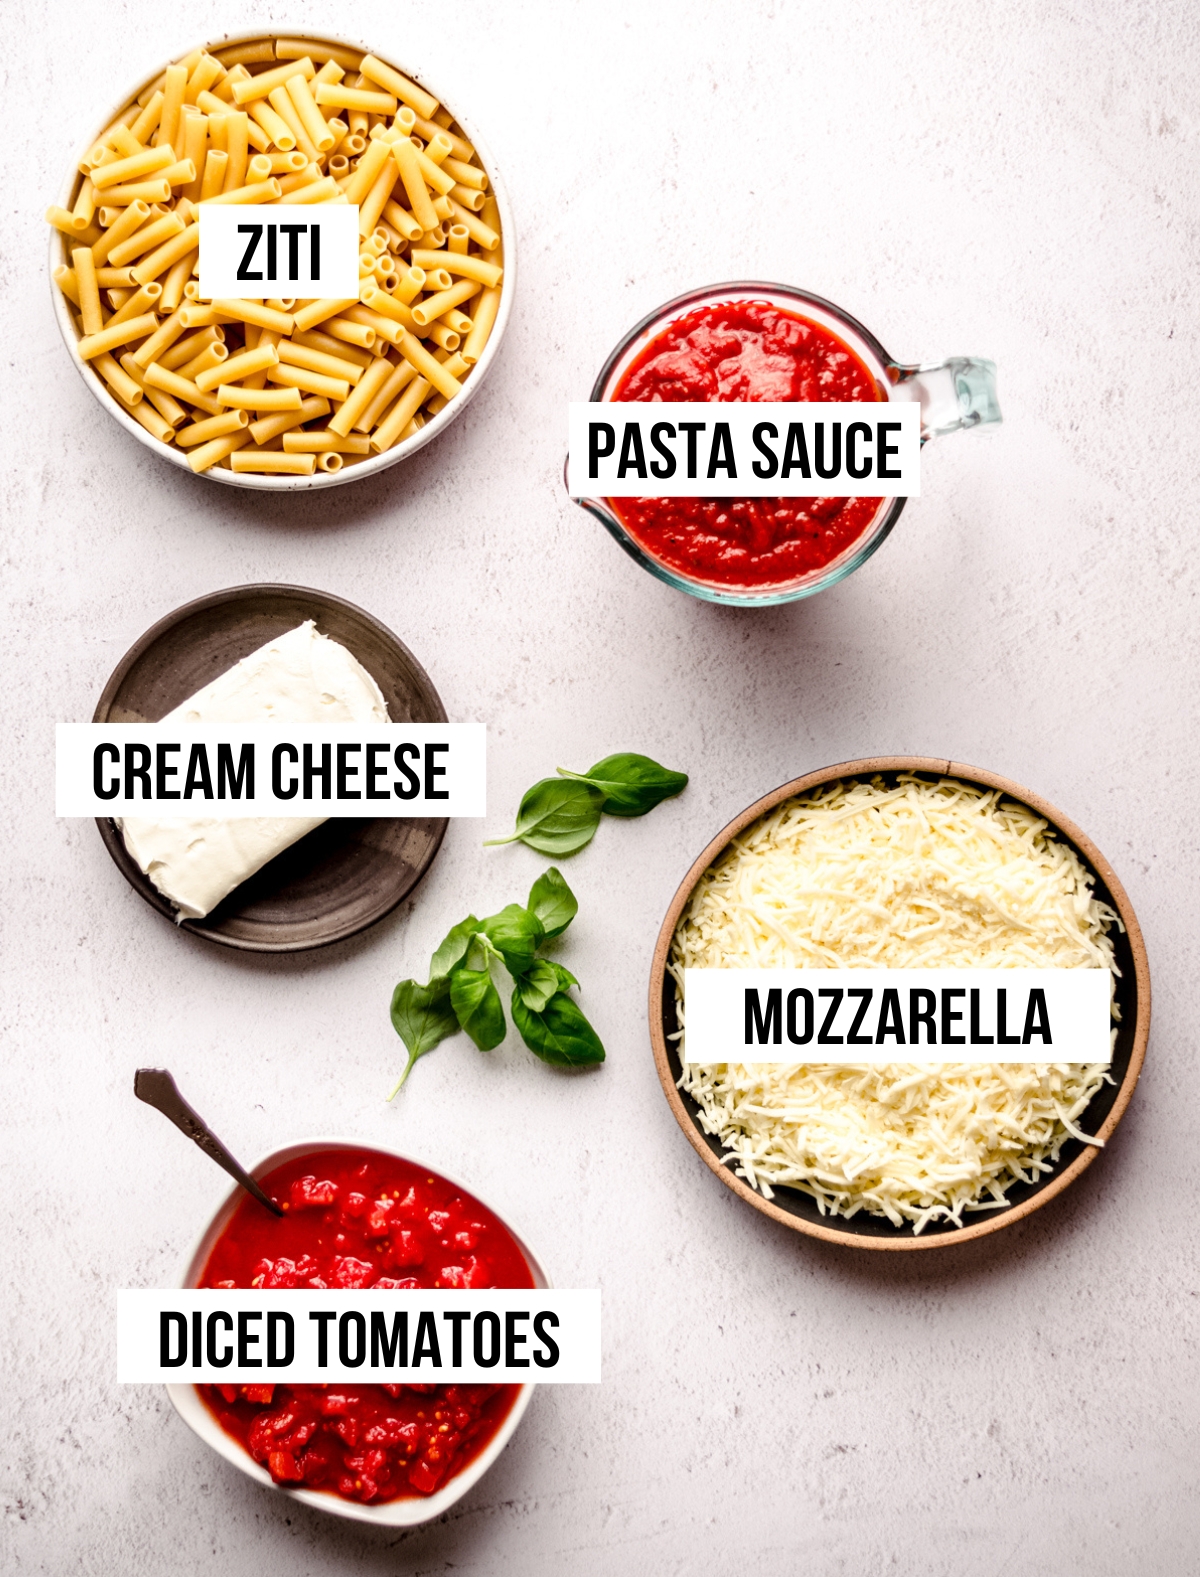 Aerial photo of ingredients for baked ziti with text overlay.